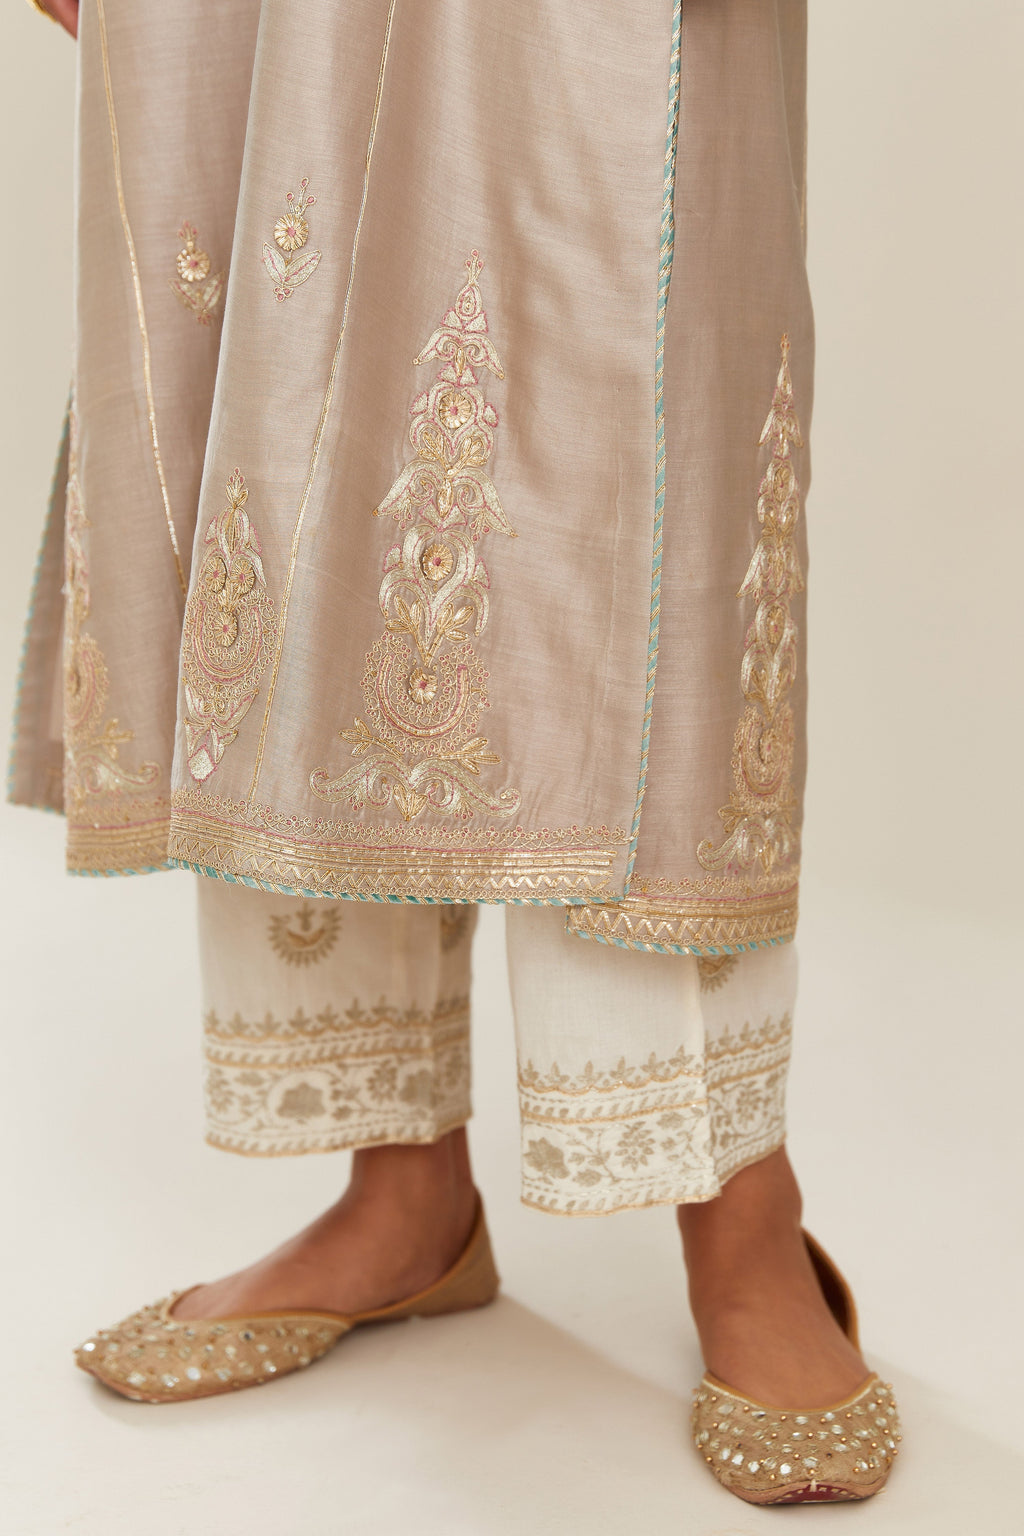 Grey silk chanderi kurta set with side panels, highlighted with gold gota and zari embroidery.